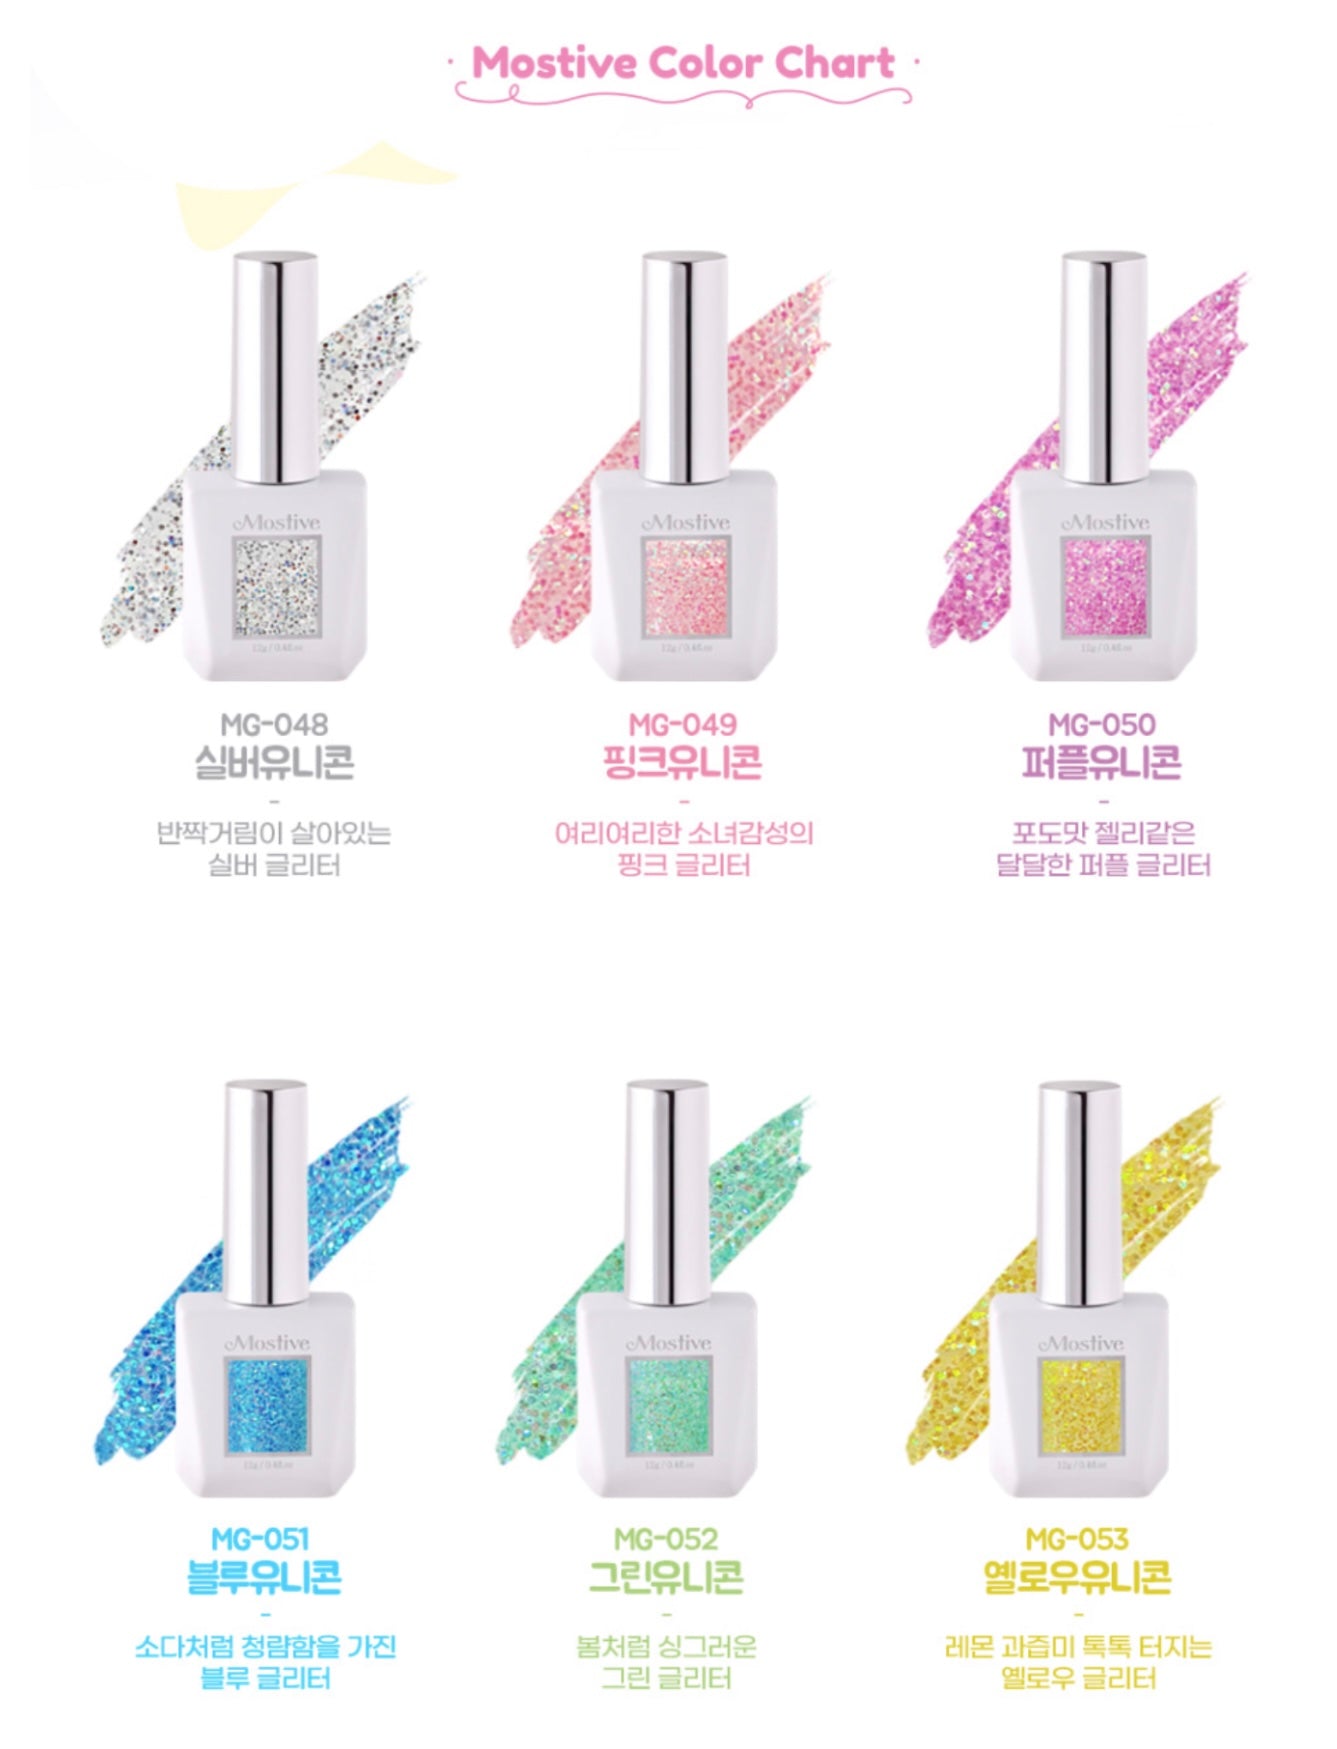 MOSTIVE Unicorn 6pc collection - Australia only